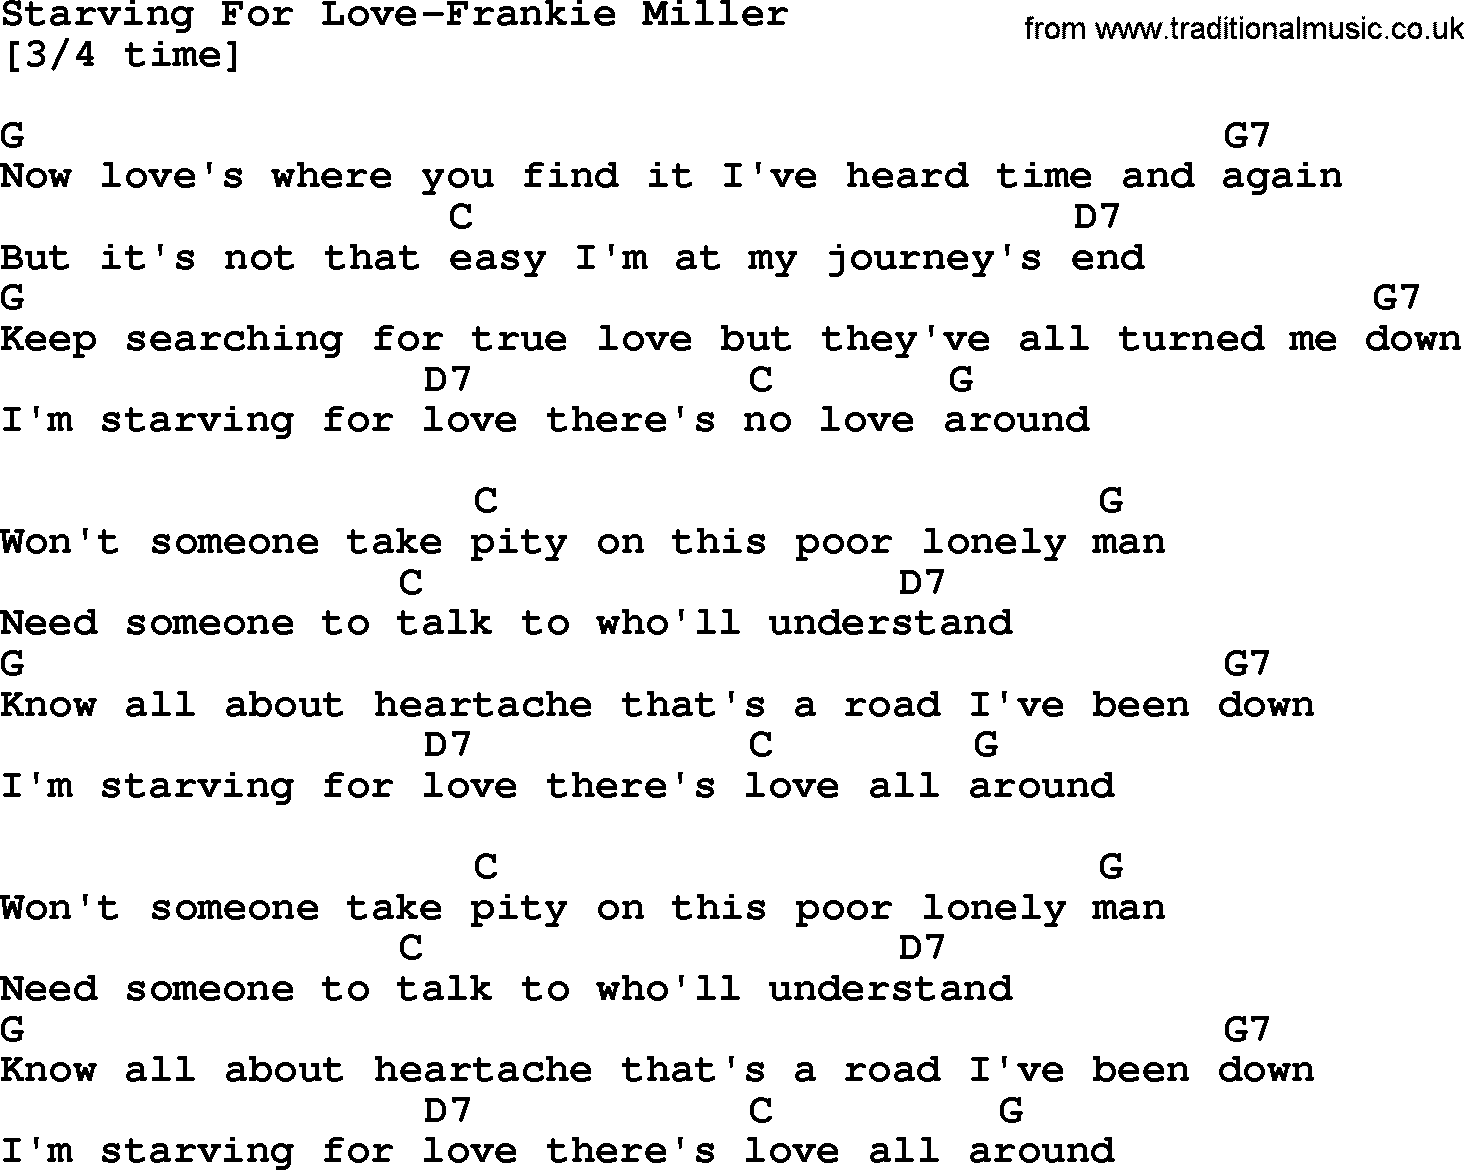 Country music song: Starving For Love-Frankie Miller lyrics and chords